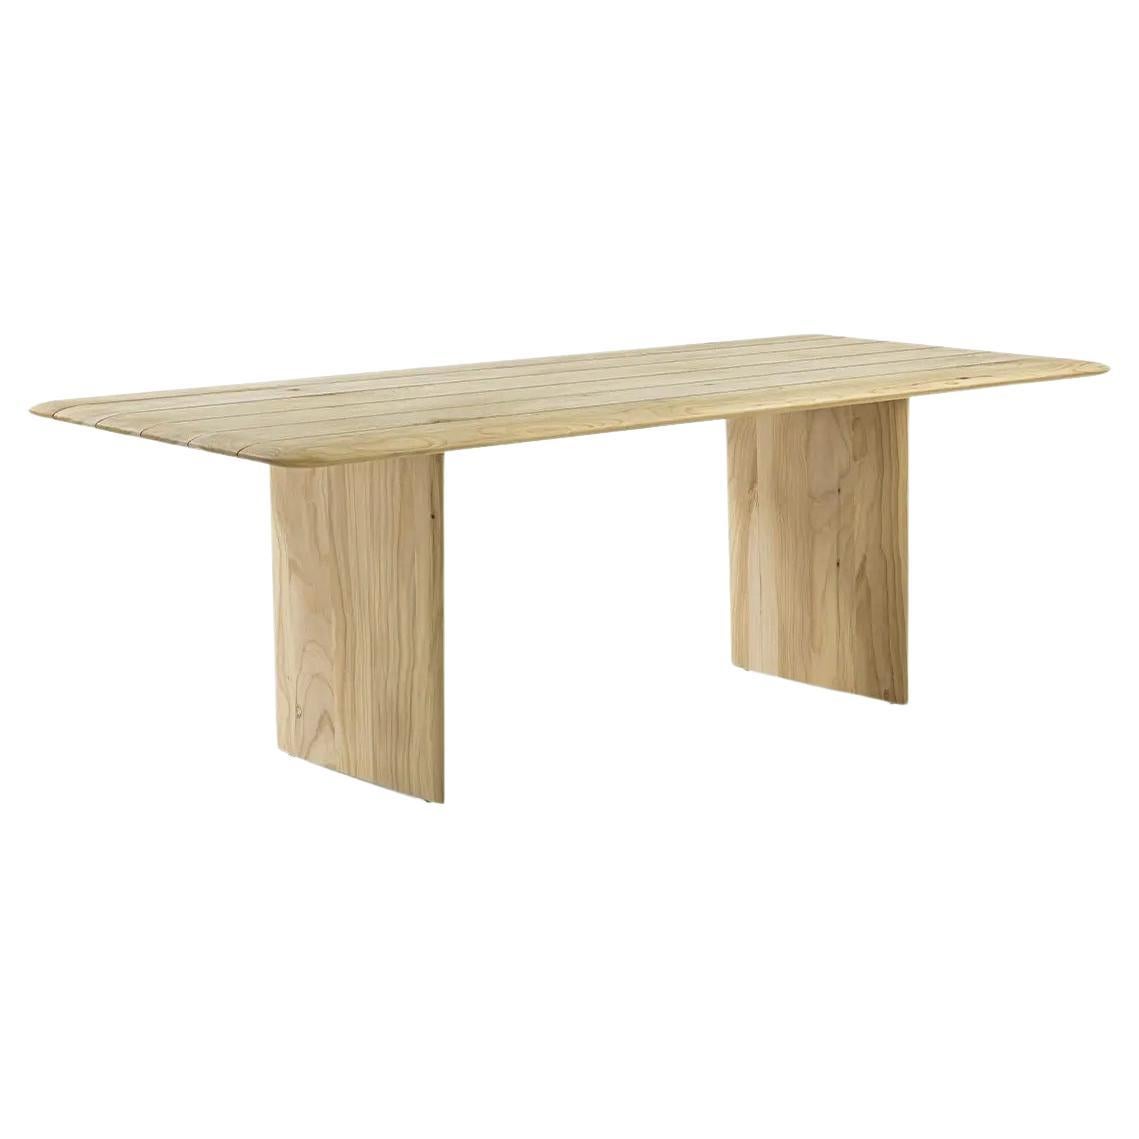 Vela Outdoor Scented Cedar Wood Dining Table by Riva 1920